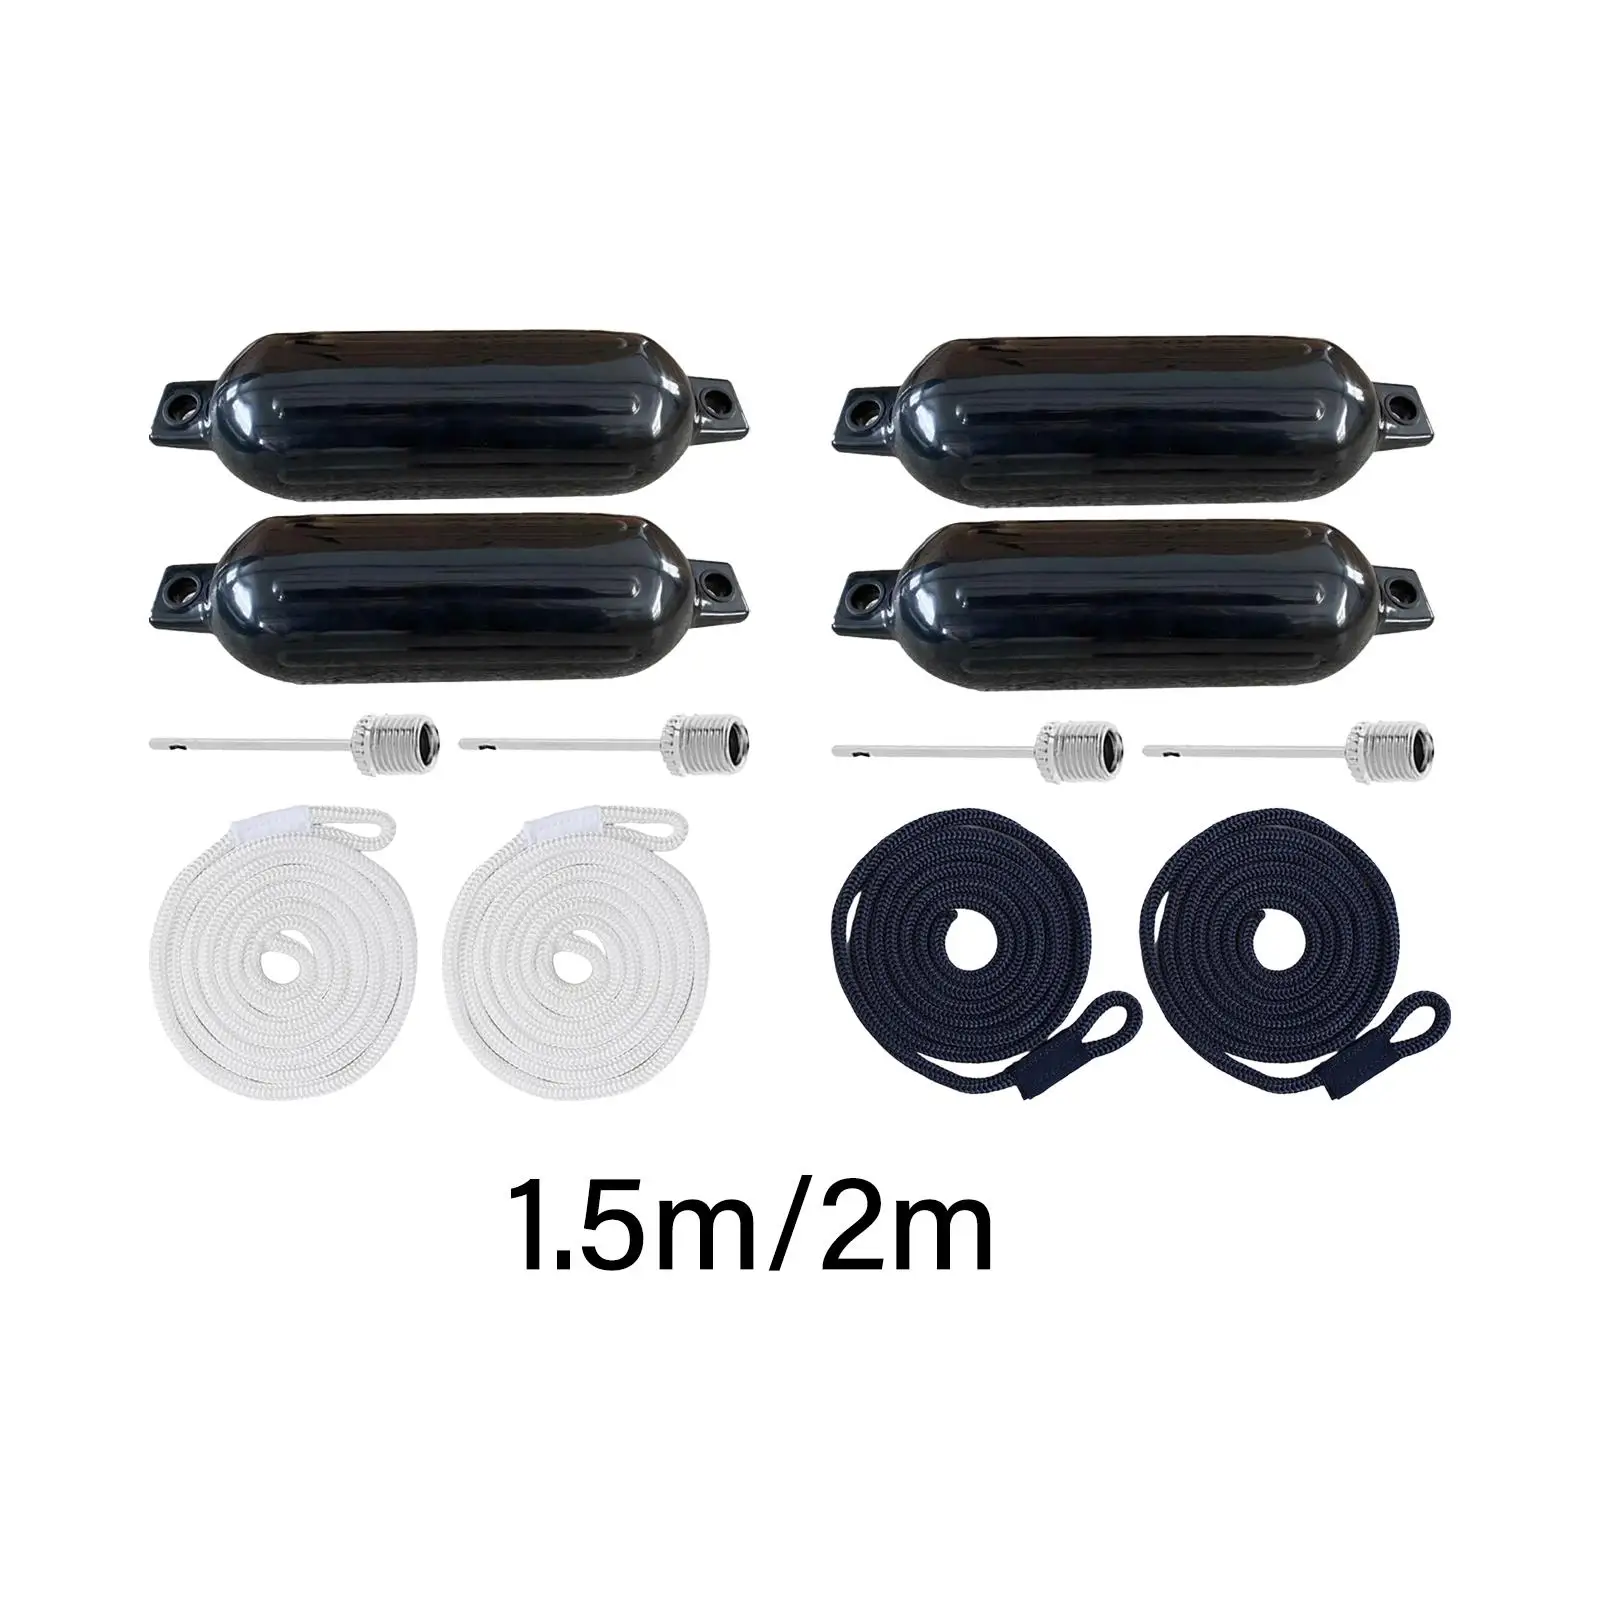 

Marine Boat Fenders with 2 Ropes Anti Collision Protector Inflatable Marine Boat Bumper for Fishing Boats Pontoon Docking